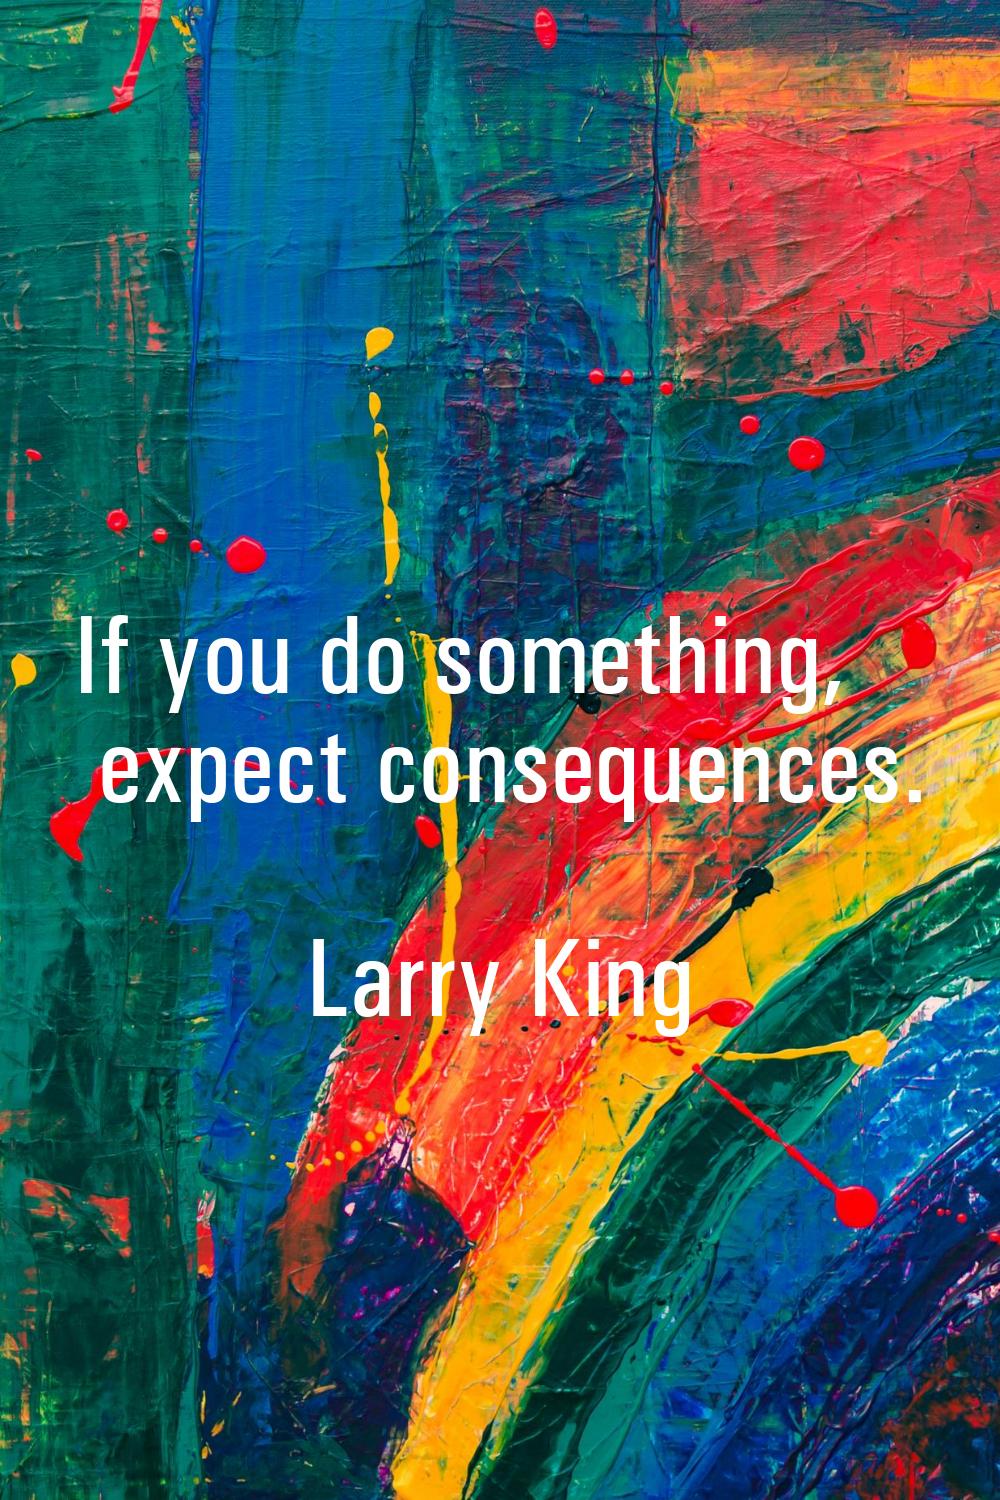 If you do something, expect consequences.